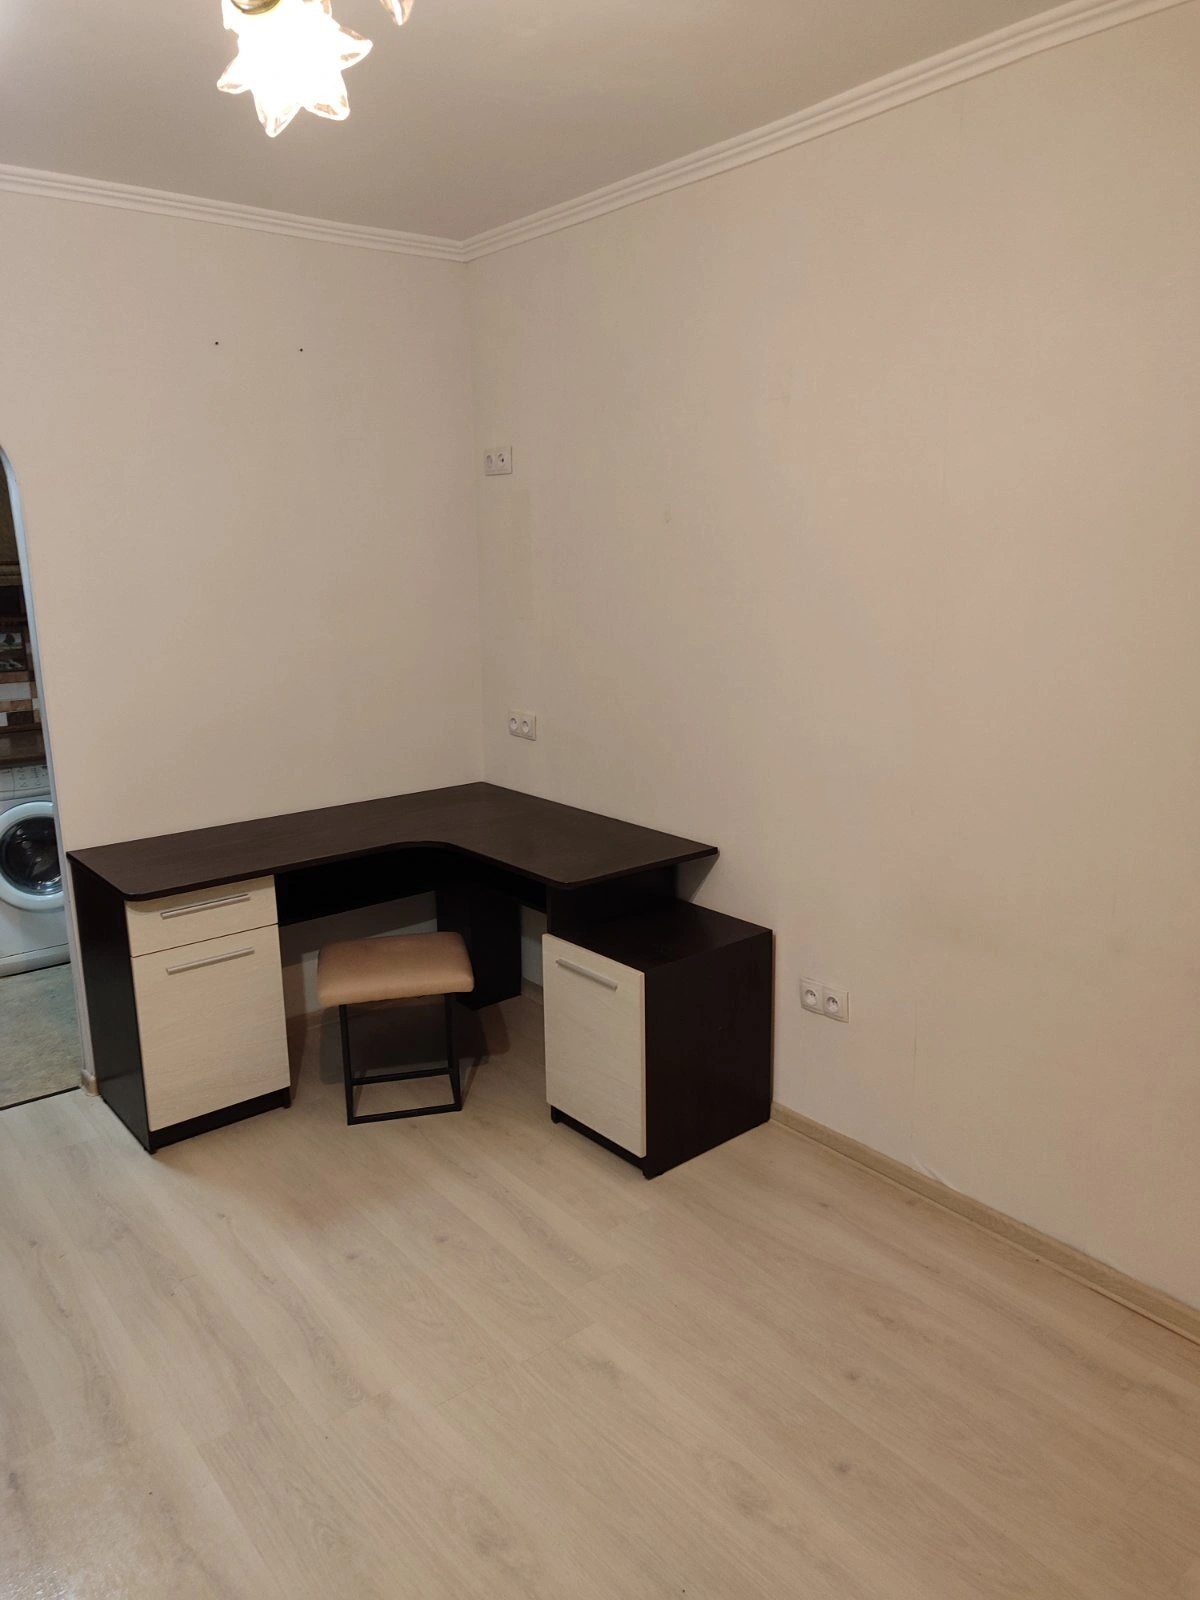 Room for rent for a long time. 1 room, 18 m², 4th floor/5 floors. Bam, Ternopil. 